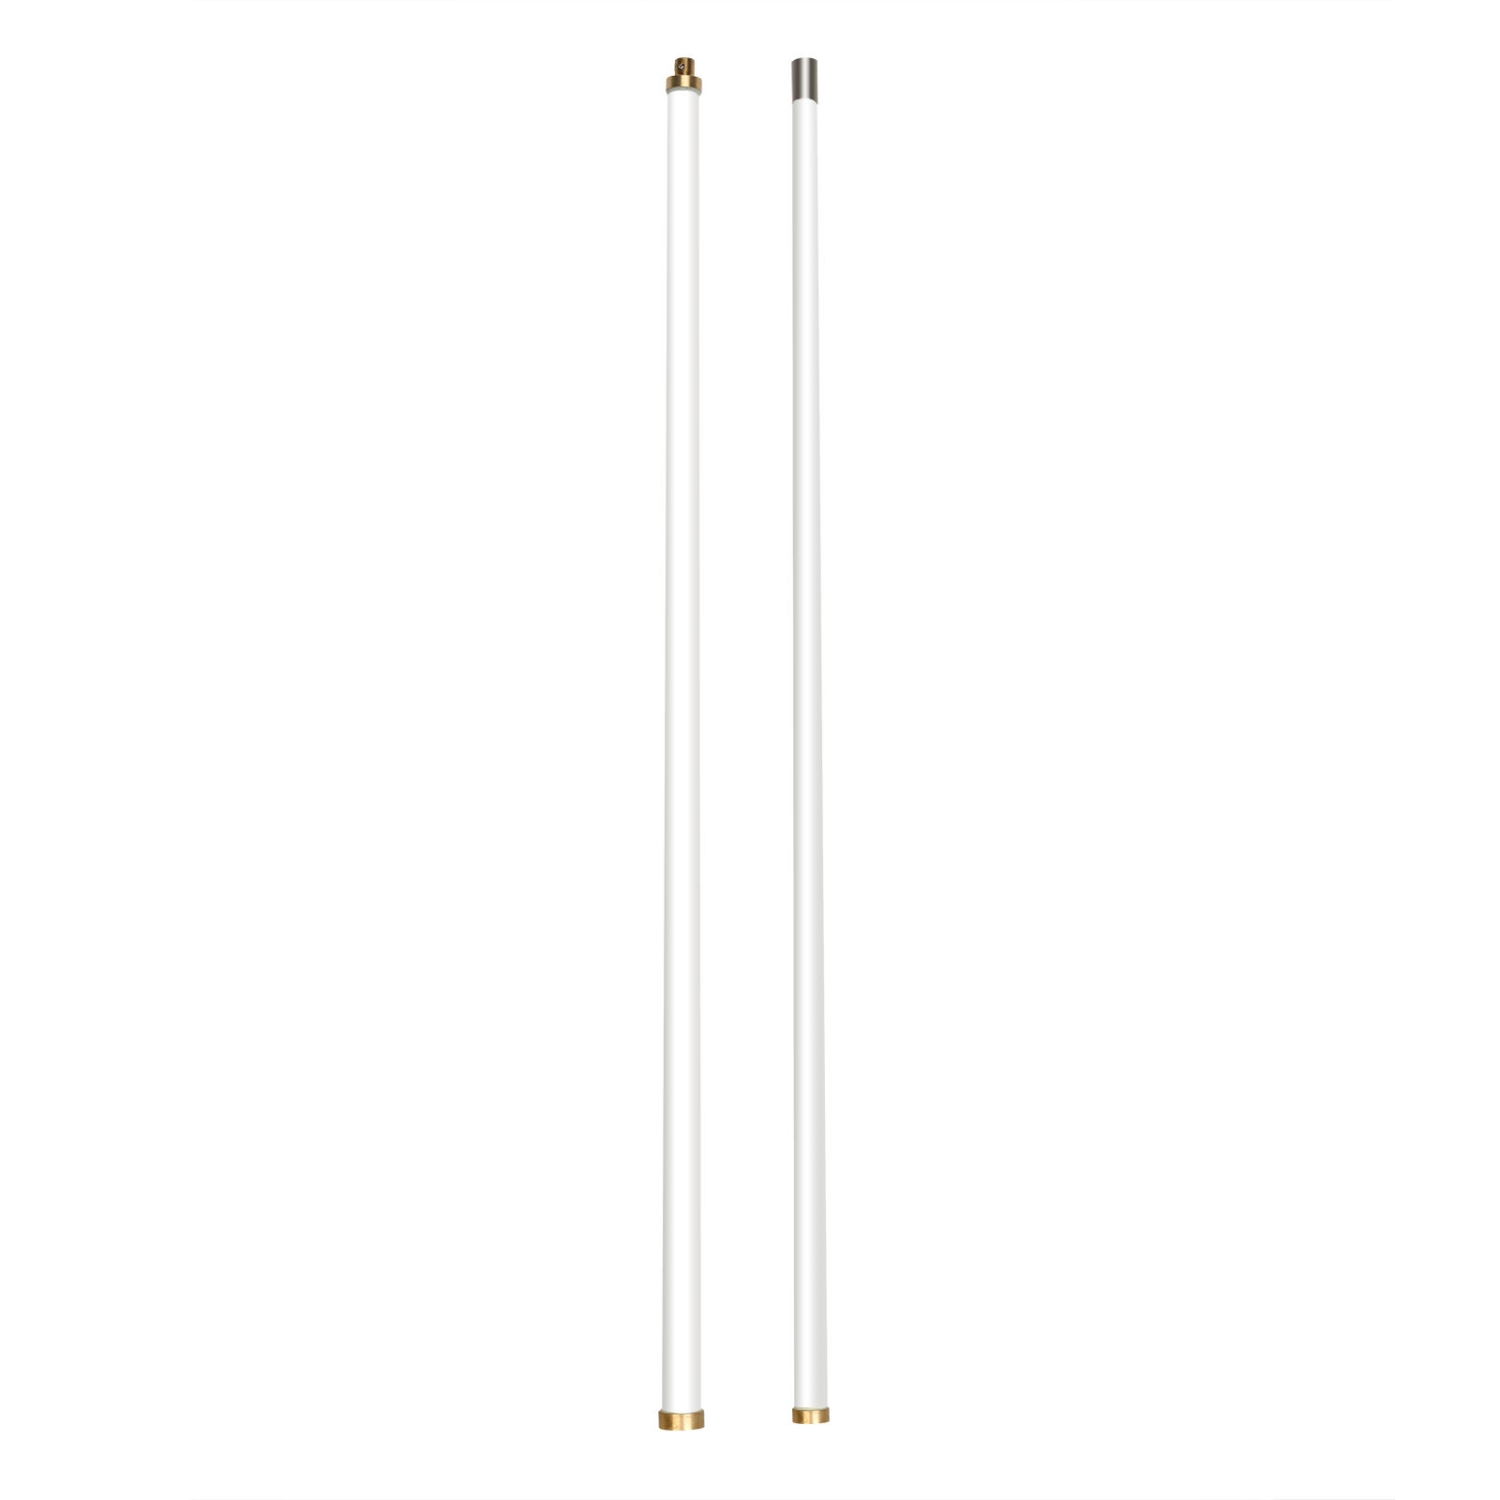 2.2m High Gain Glass Steel Omni-Directional Antenna VHF UHF SL16-K For Base Station For Repeater